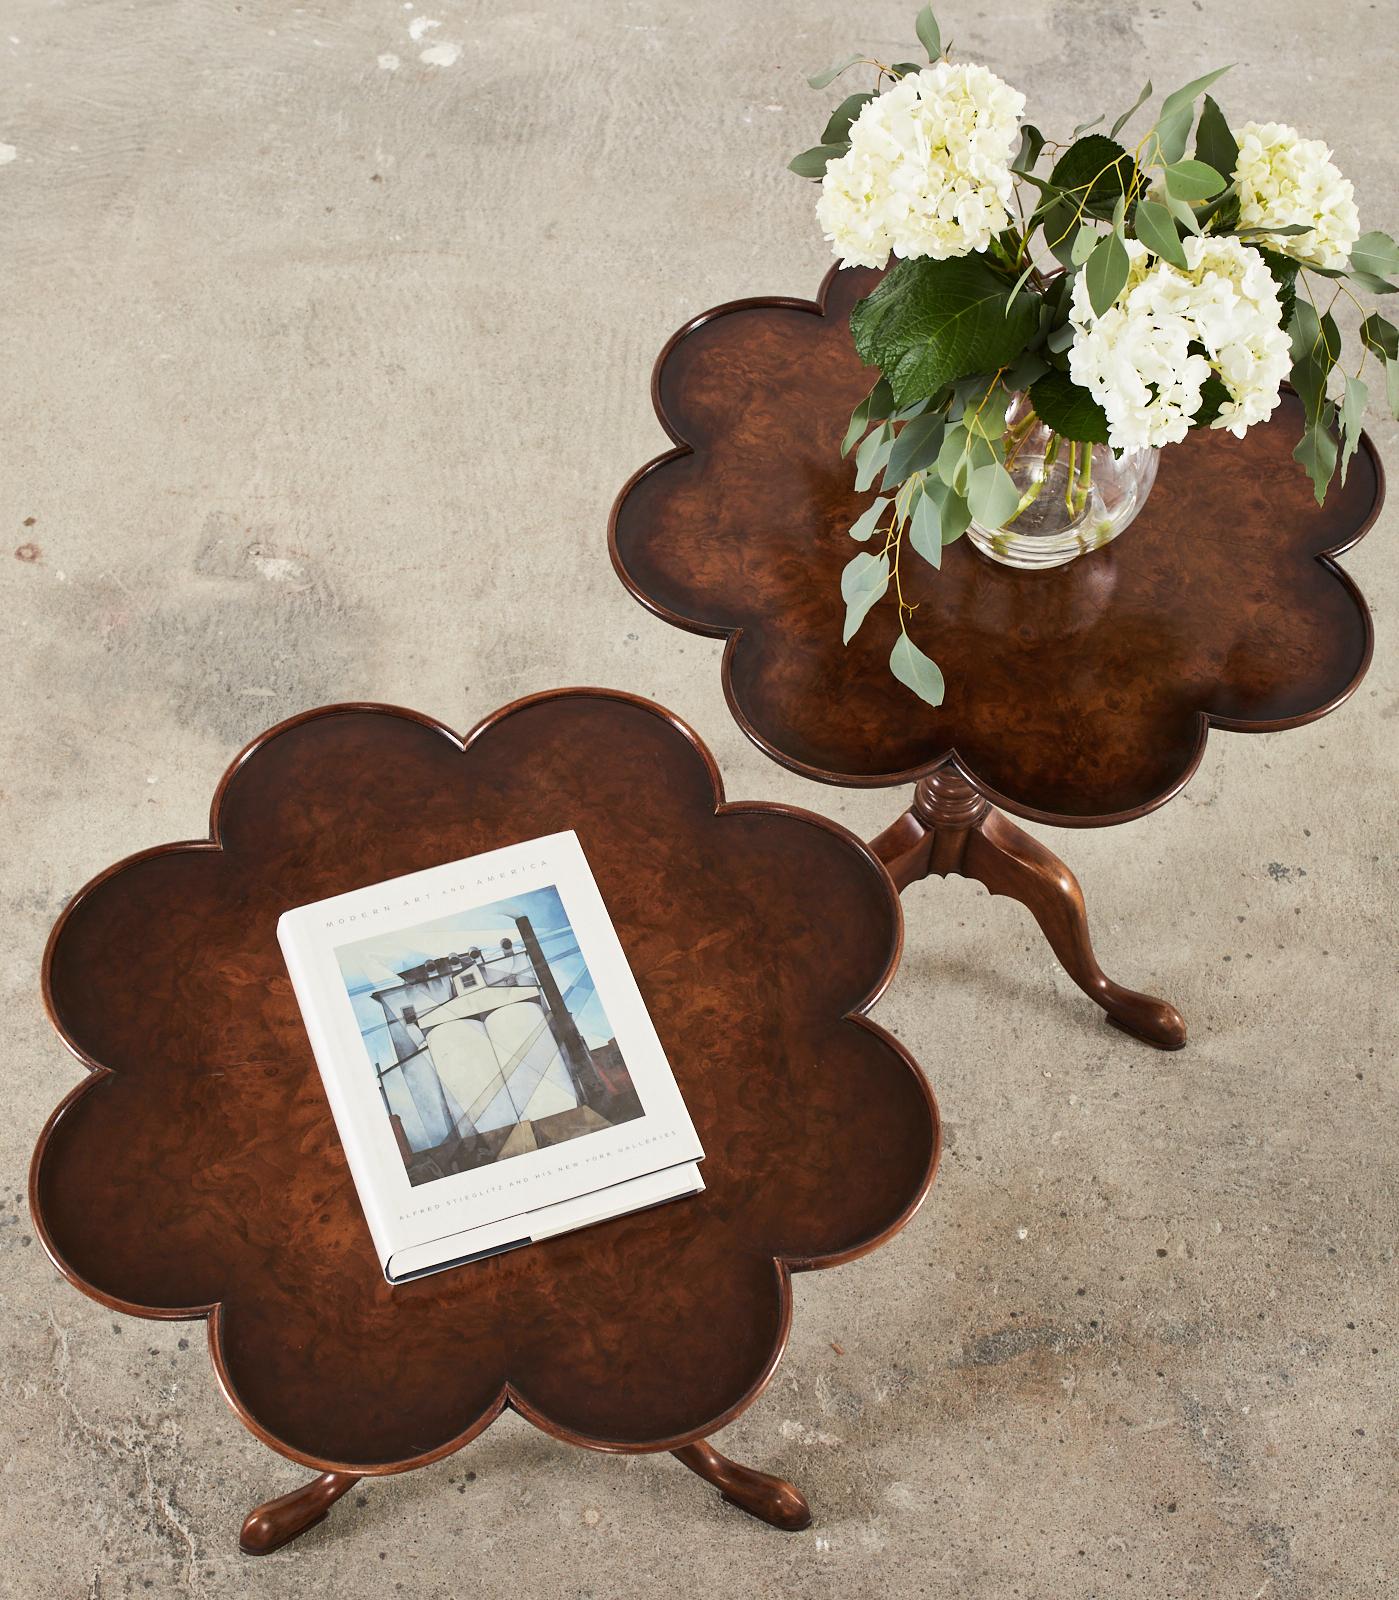 Fine pair of matching Georgian mahogany tilt-top dessert or tea tables featuring clover shaped tops. The shaped tops are inlaid with a rich burl veneer having a wonderful flame pattern and movement. The tops are supported by a tilt bird cage